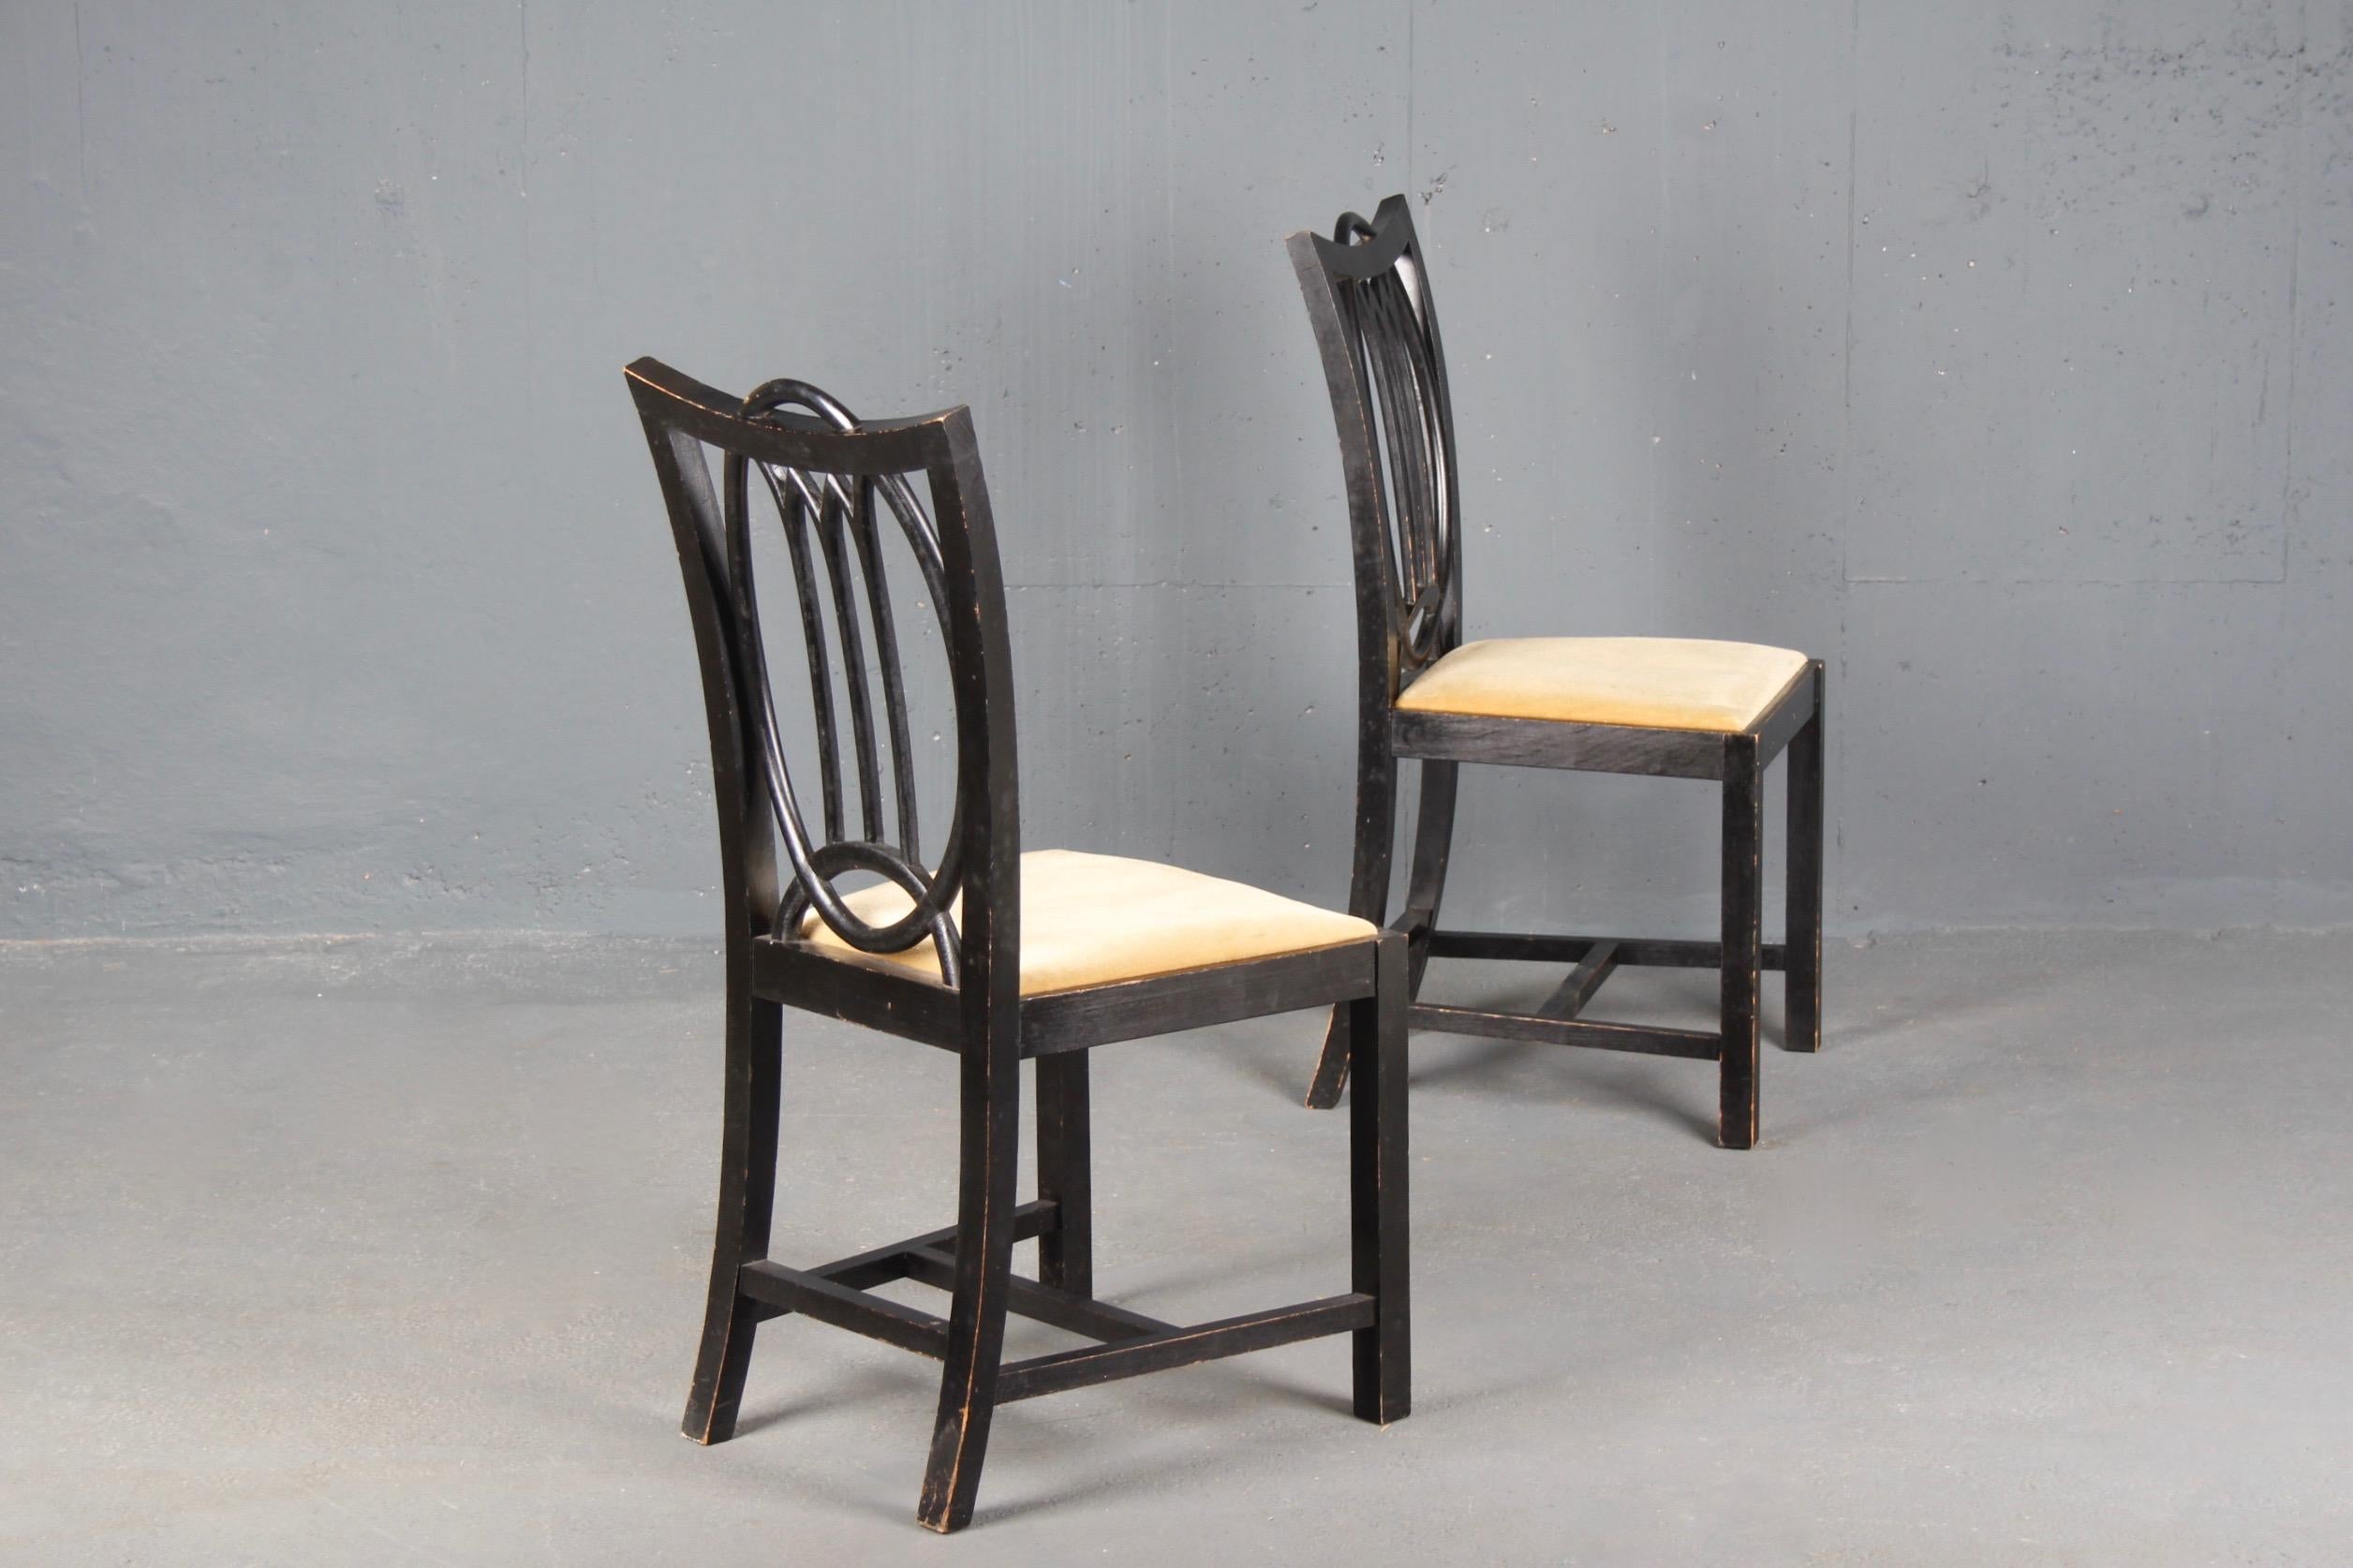 Early 20th Century Pair of Black Chairs